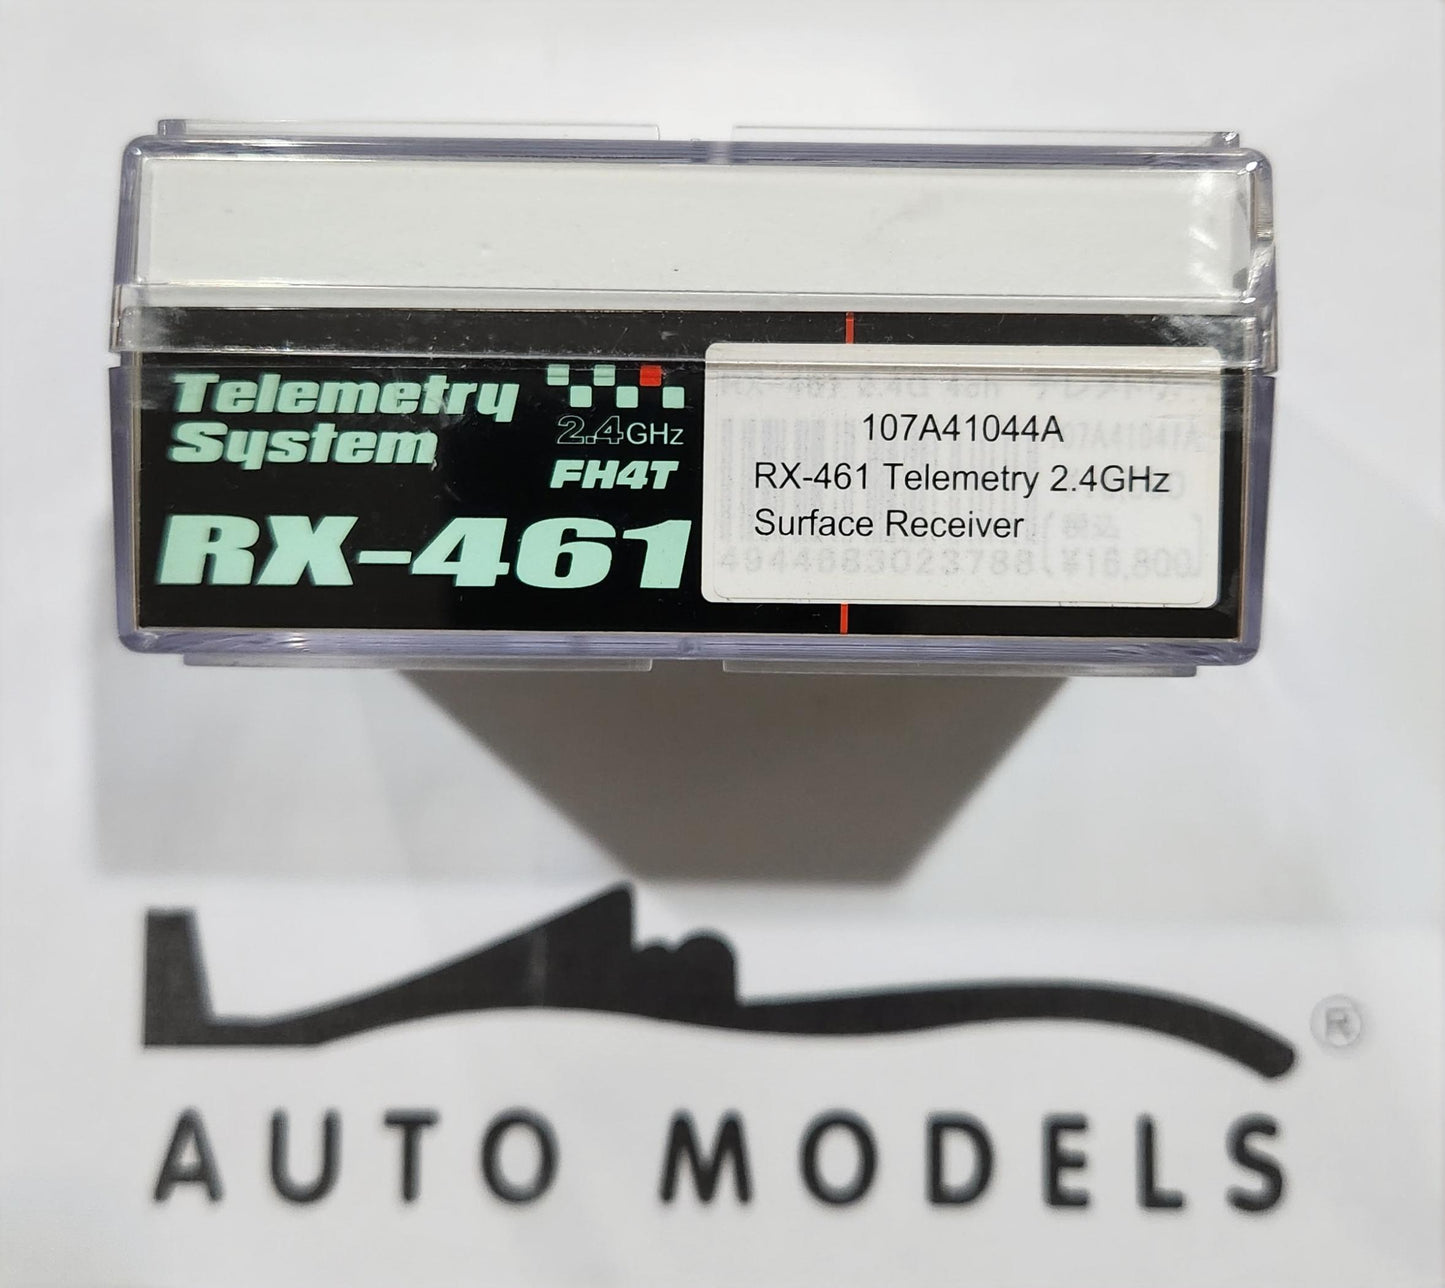 Sanwa RX-461 Telemetry 2.4GHz Surface Receiver